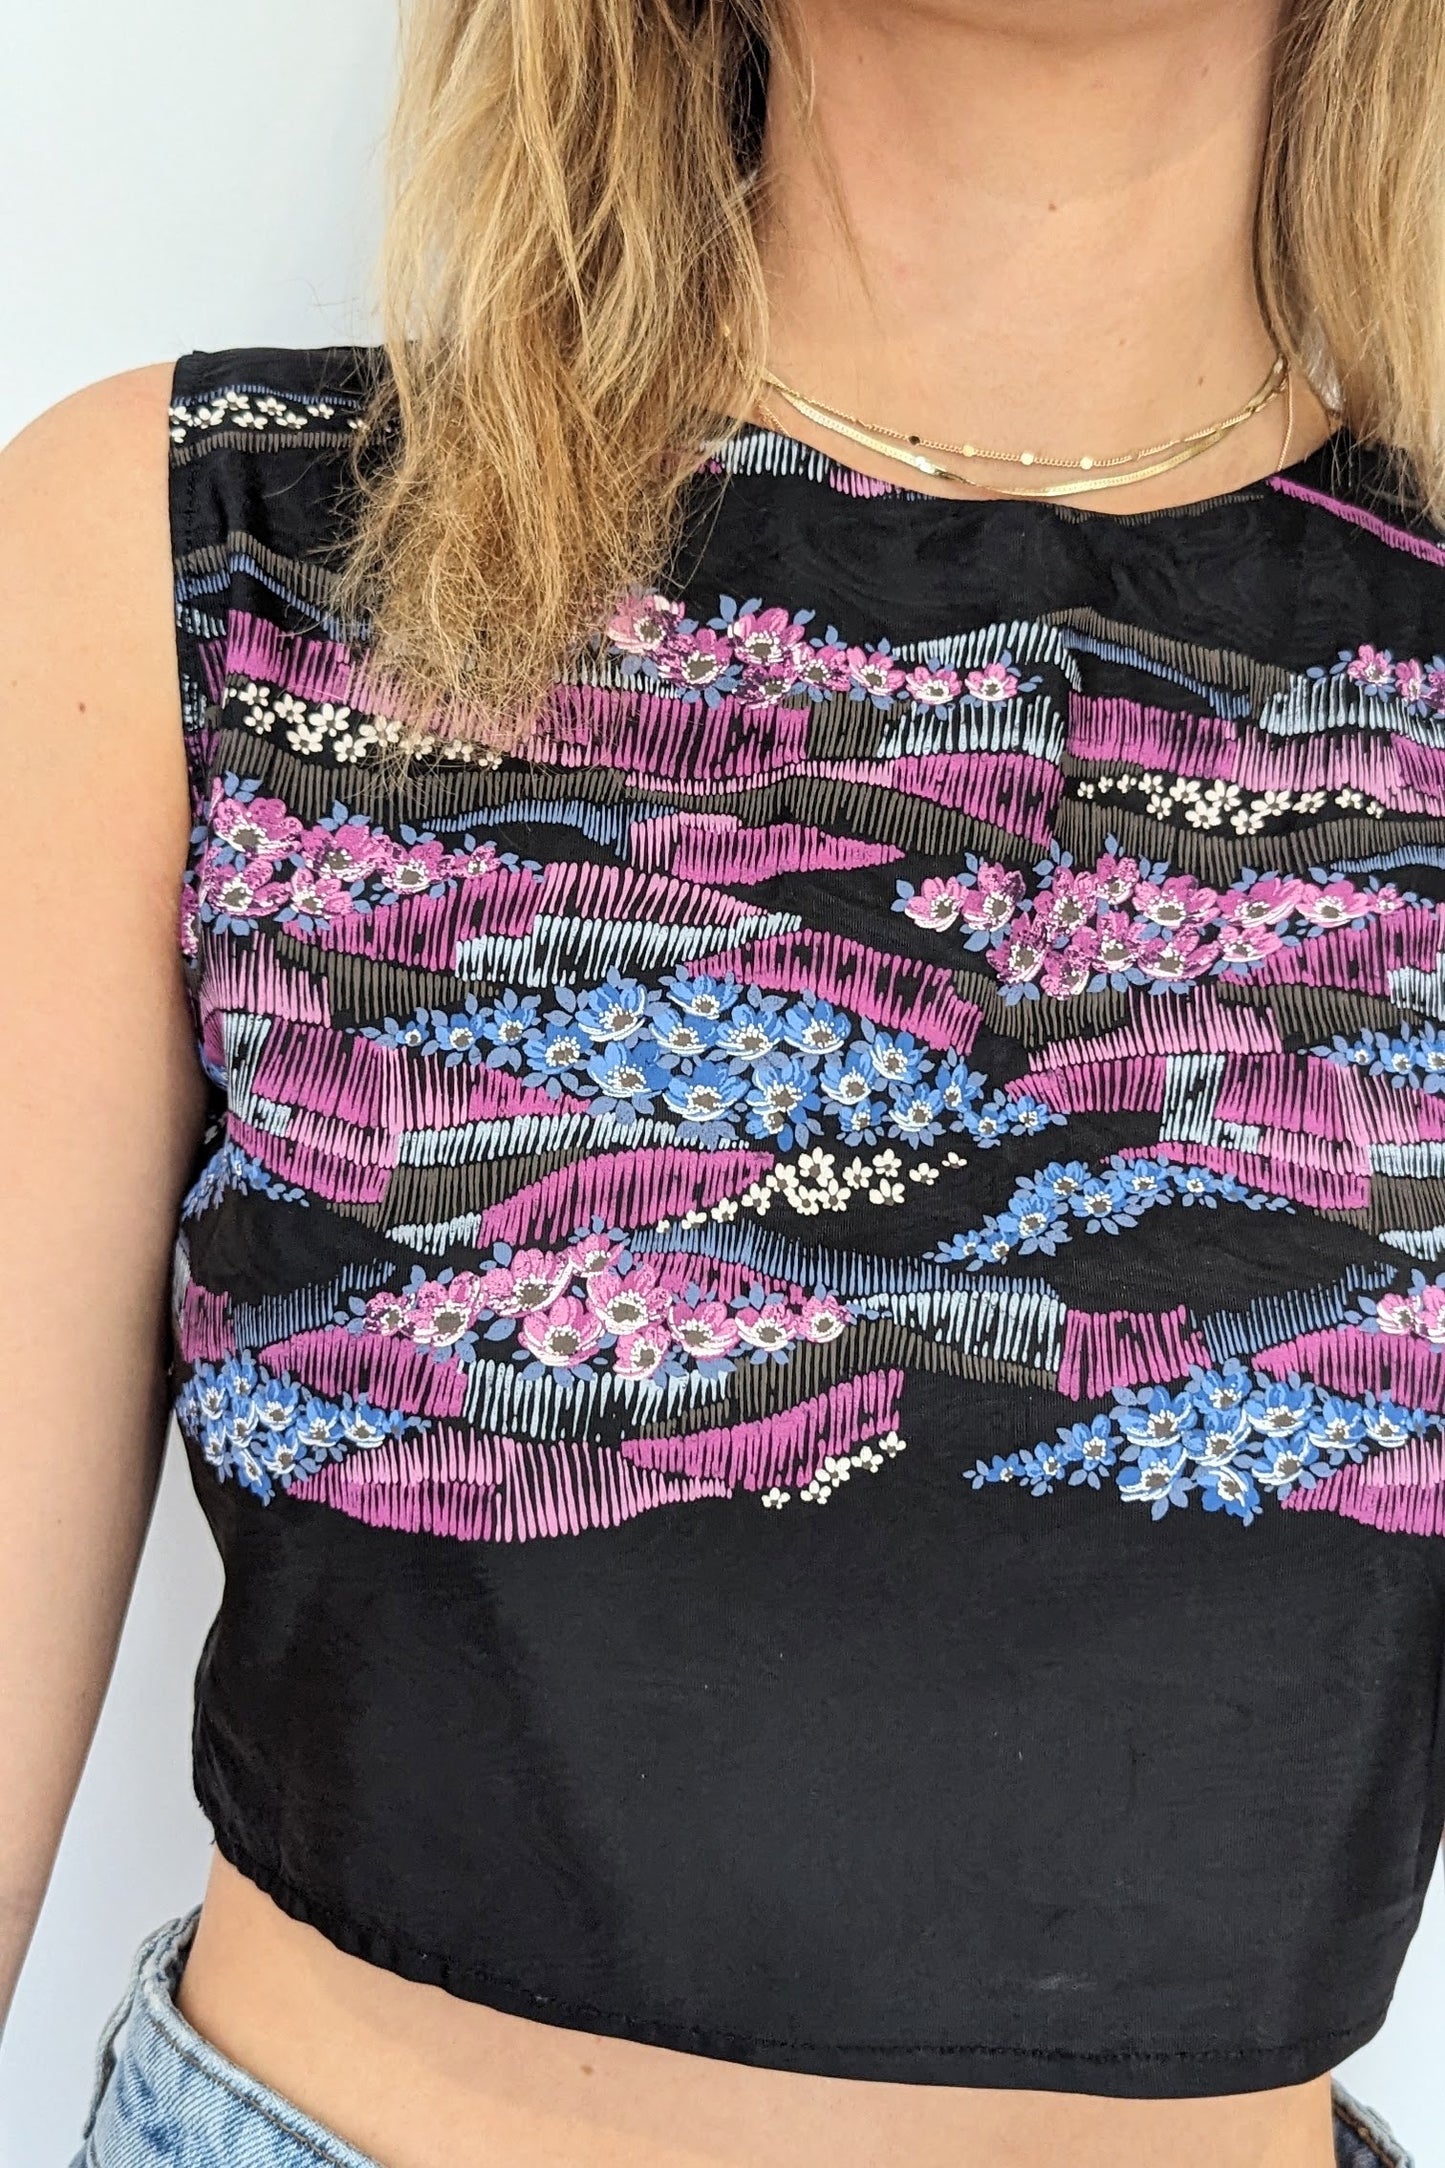 floral pattern on black cropped top